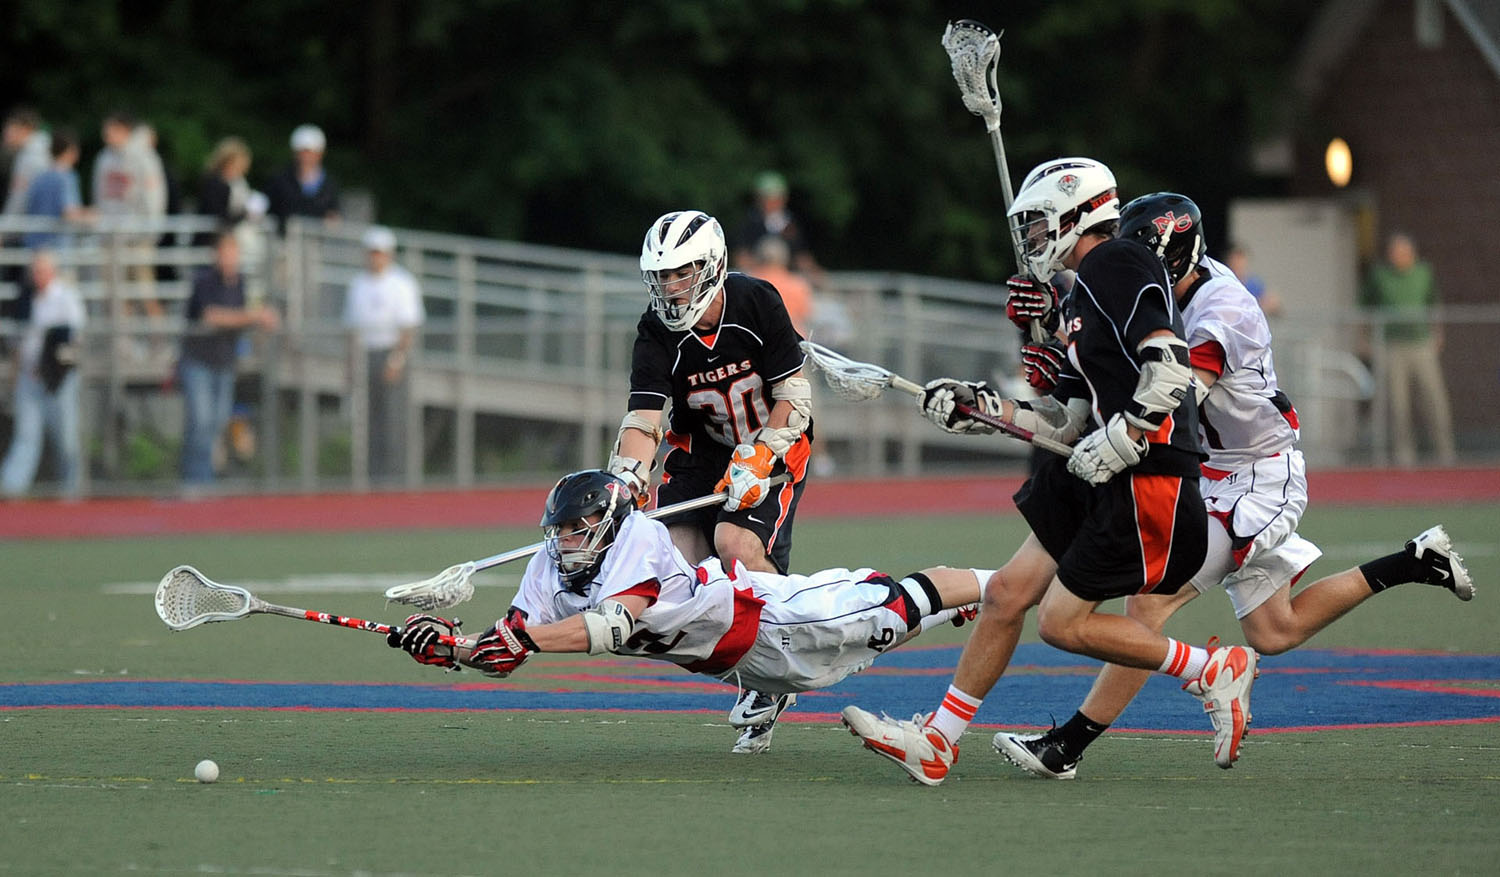  New Canaan's Robert Distler dives for the ball during Friday's FCIAC boys lacrosse championship game at Brien McMahon High School in Norwalk on May 25, 2012. 